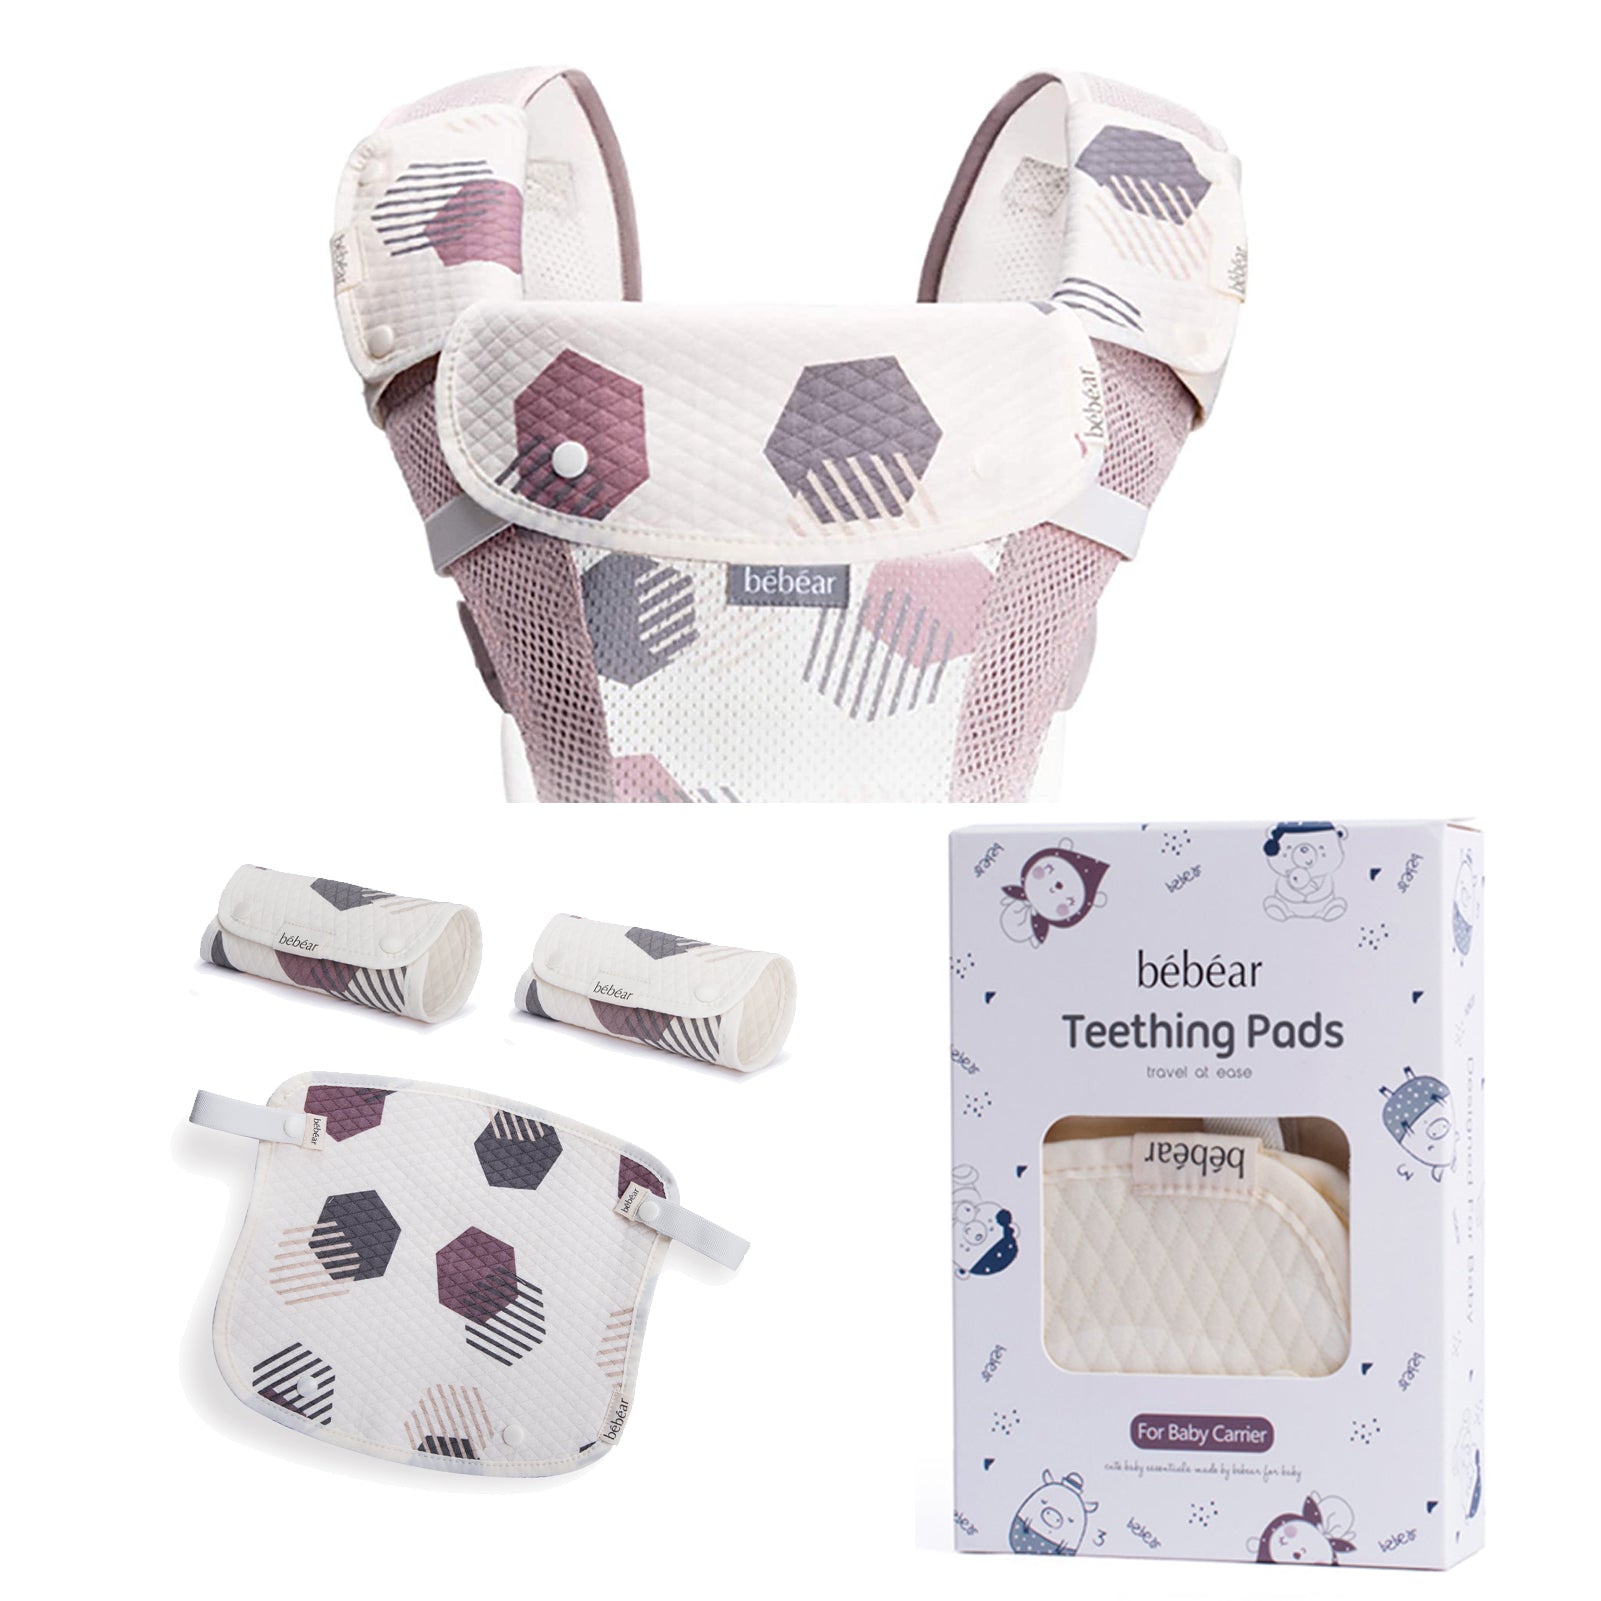 Bebamour Teething Pads for Baby Carrier, 100% Cotton Drool Bibs for Baby Carrier Newborn to Toddler